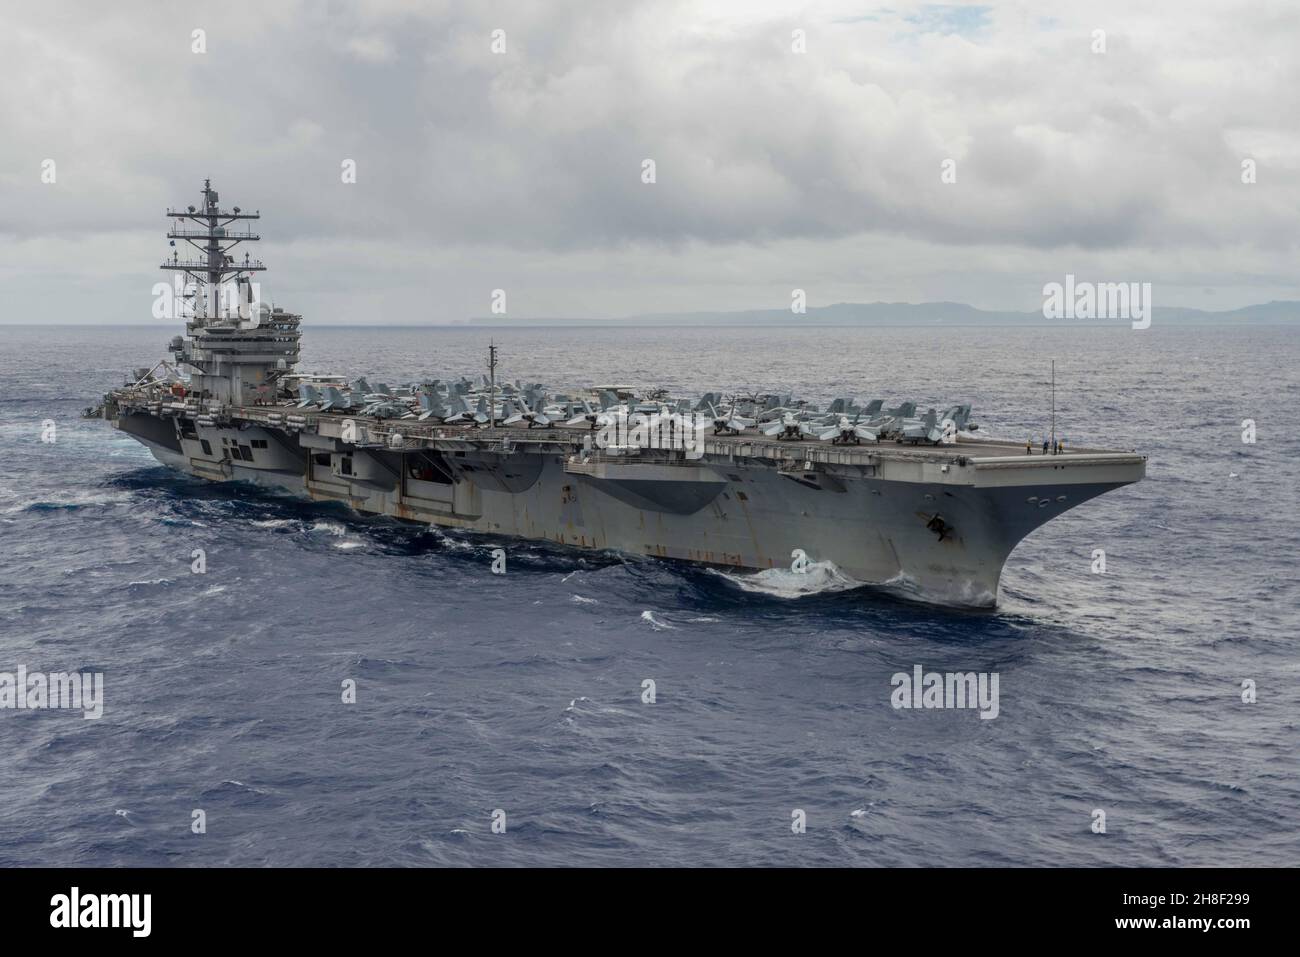 The U.S. Navy Nimitz-class nuclear-powered aircraft carrier USS Ronald Reagan departs Guam on a routine patrol as the flagship of the 5th Fleet September 29, 2016 in the Philippine Sea. Stock Photo